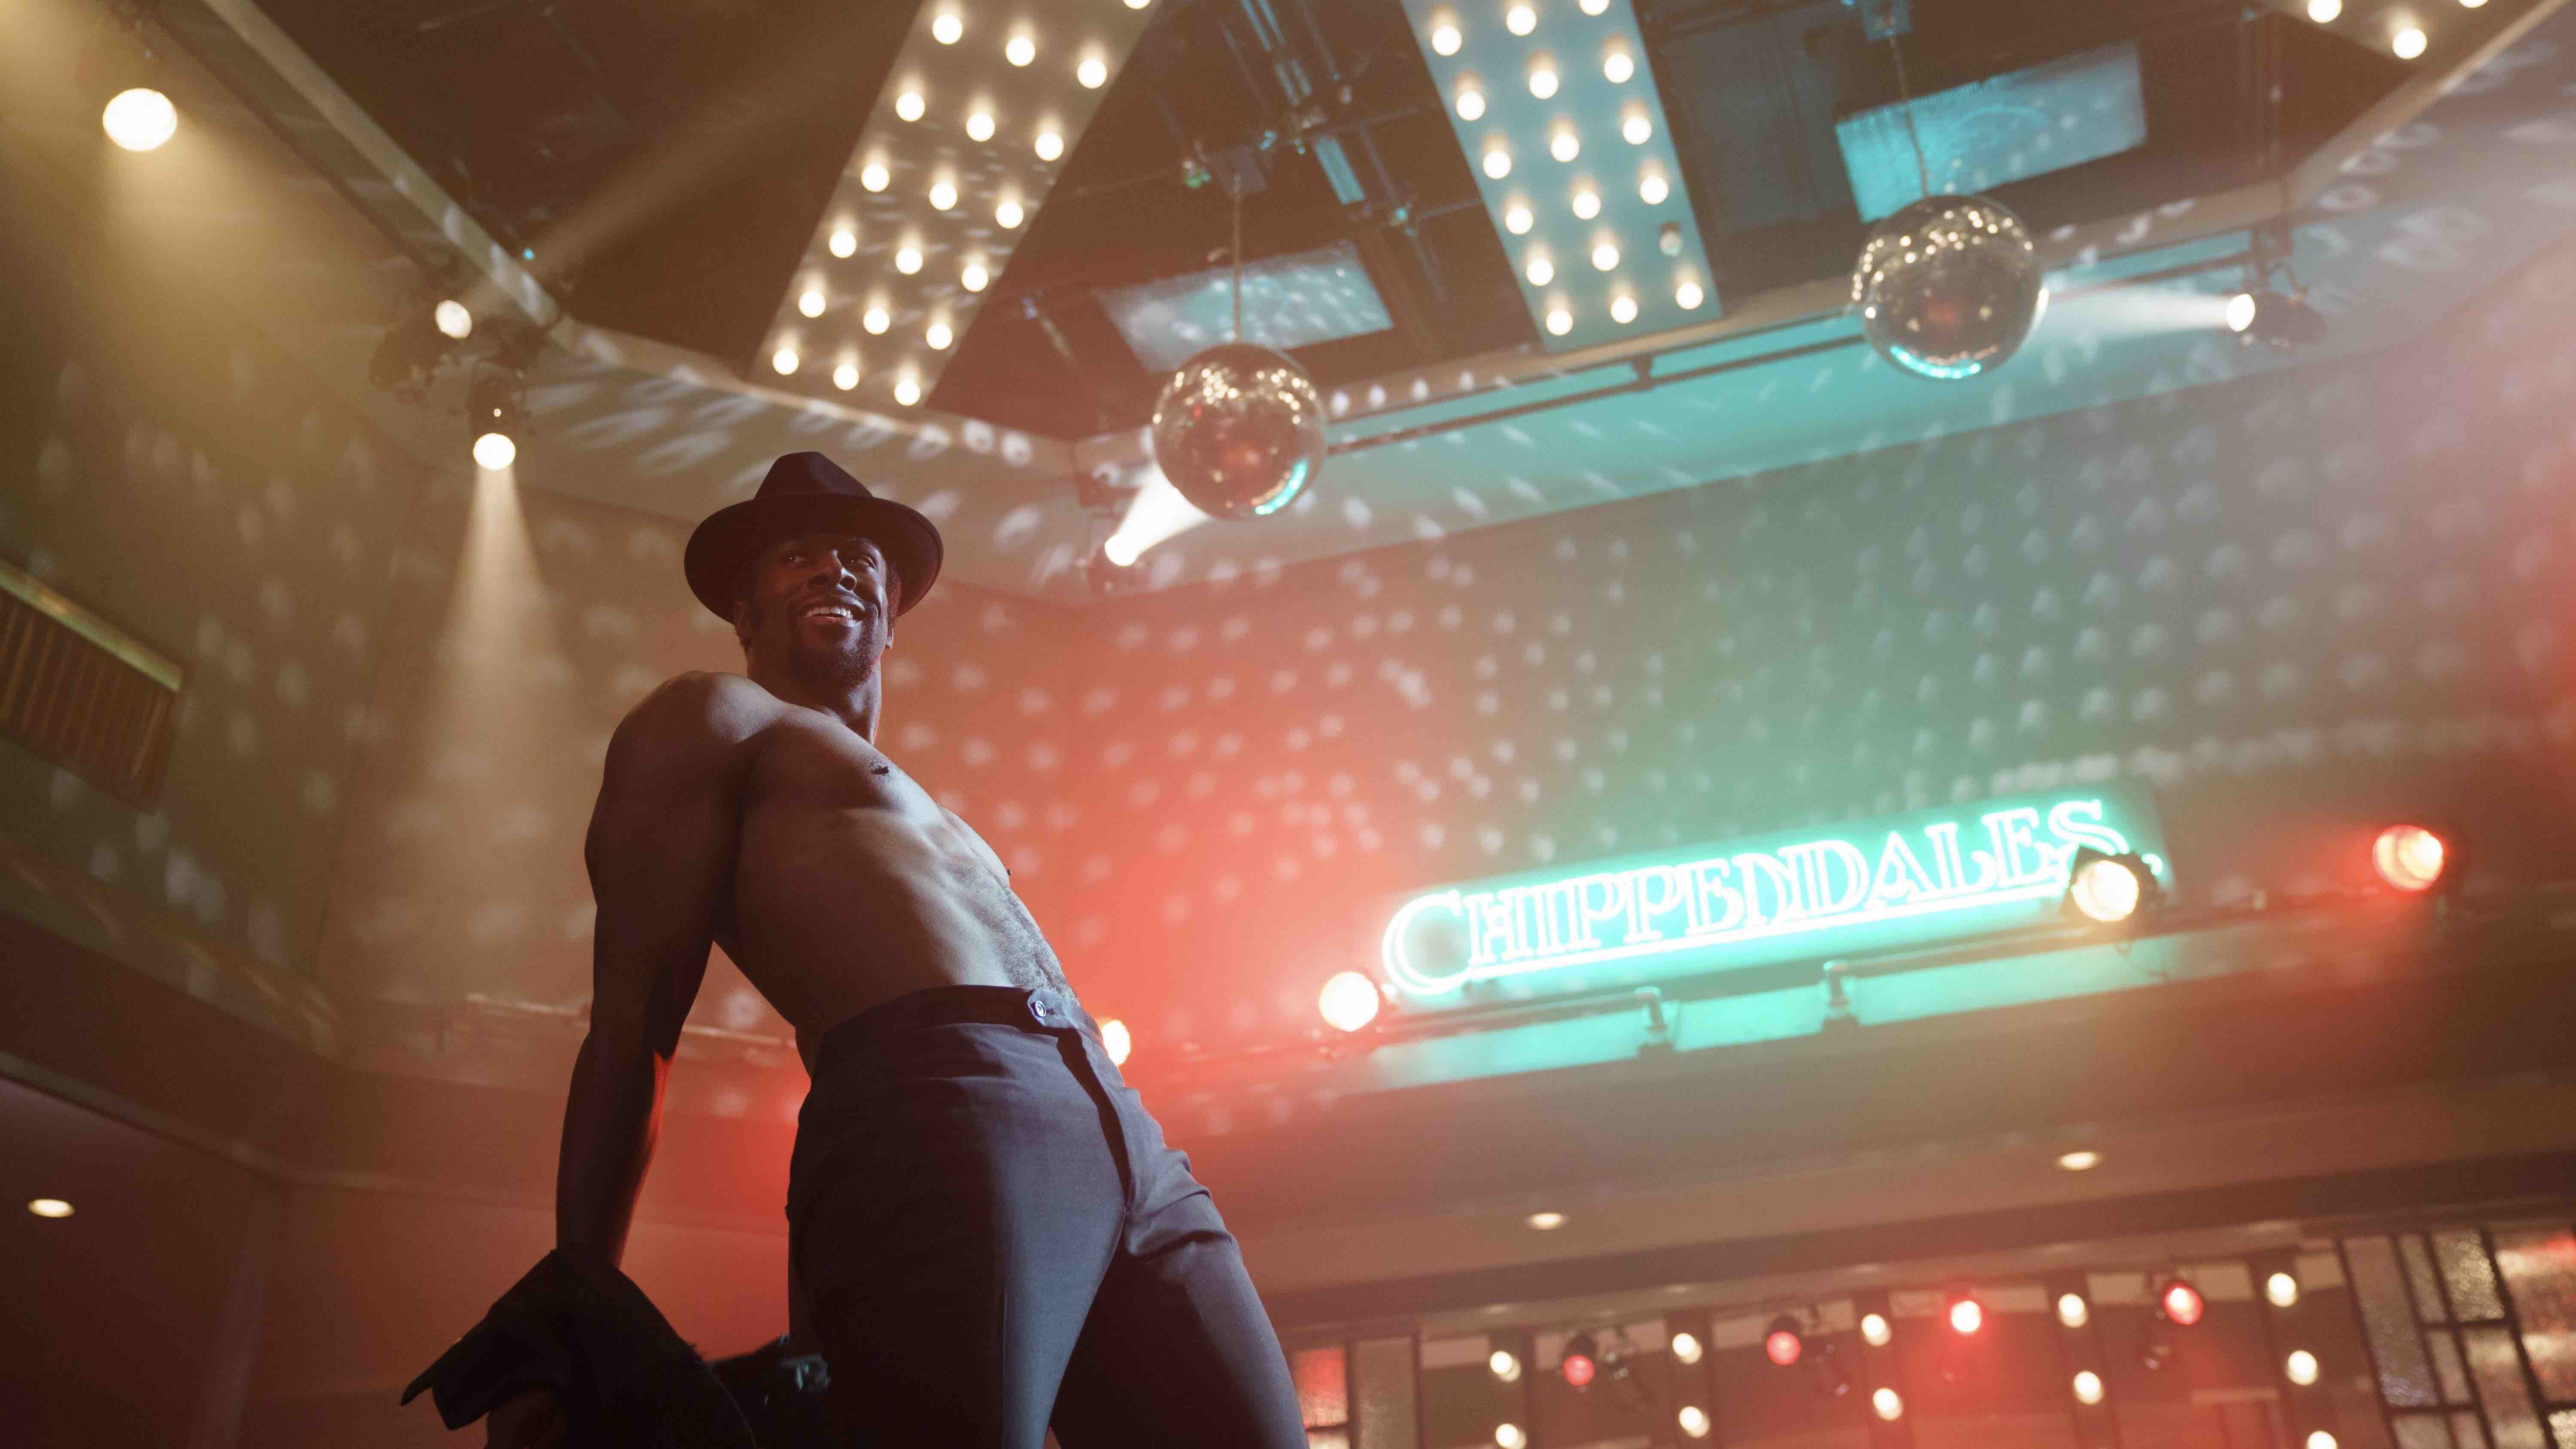 Welcome to Chippendales on Hulu